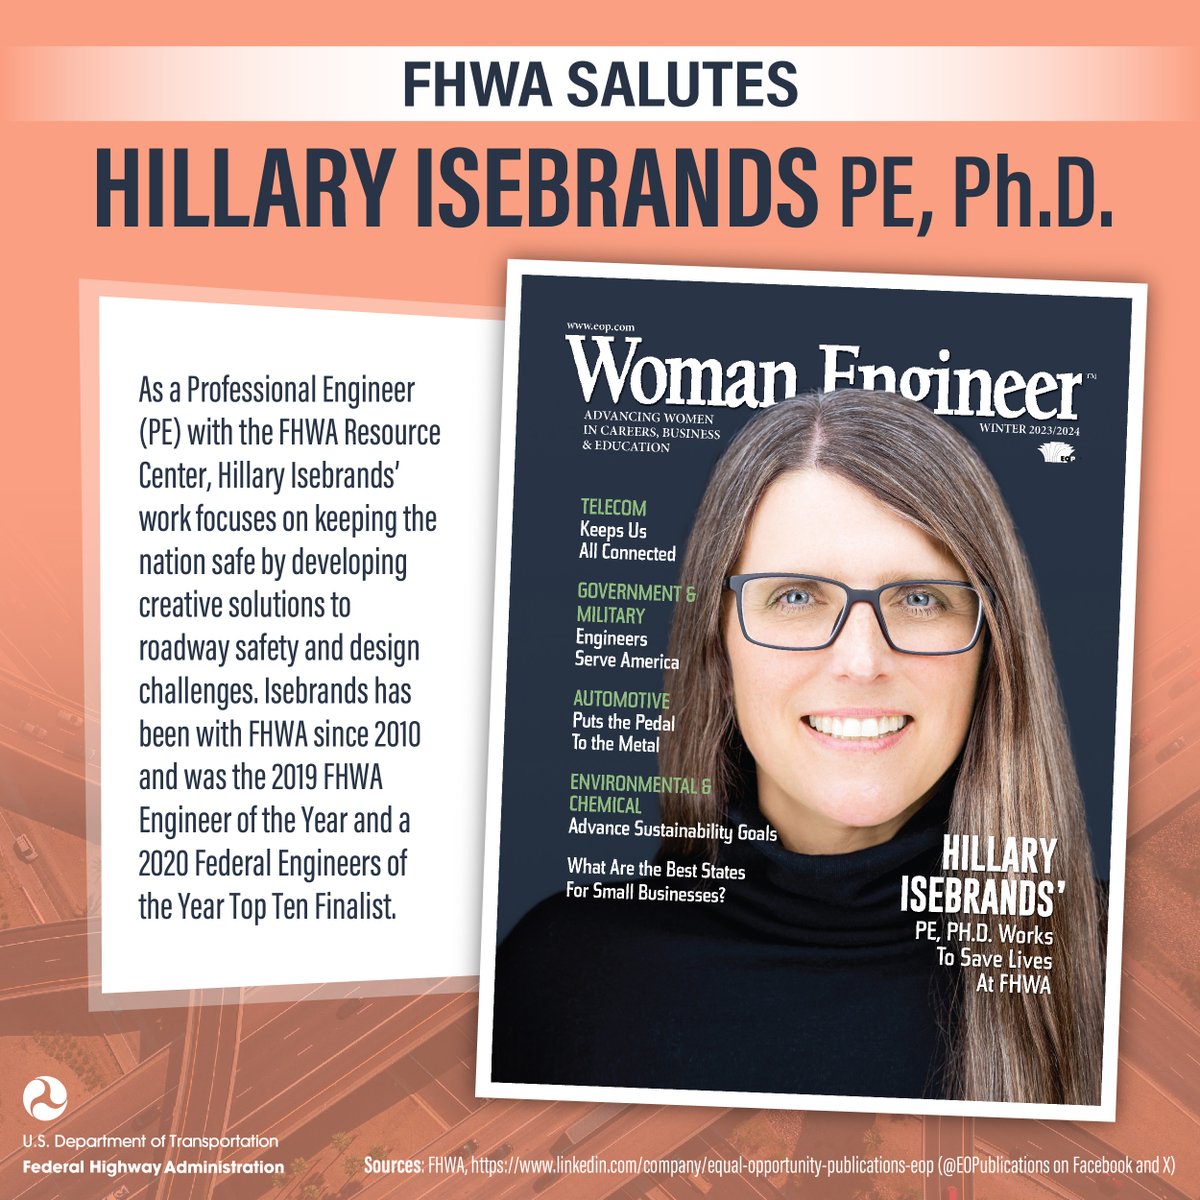 FHWA honors FHWA Engineer Hillary Isebrands, who has been recognized for developing creative solutions to roadway safety and design challenges. She was 2019 FHWA Engineer of the Year, and is featured in the latest issue of Women Engineer Magazine: bt.e-ditionsbyfry.com/publication/fr…